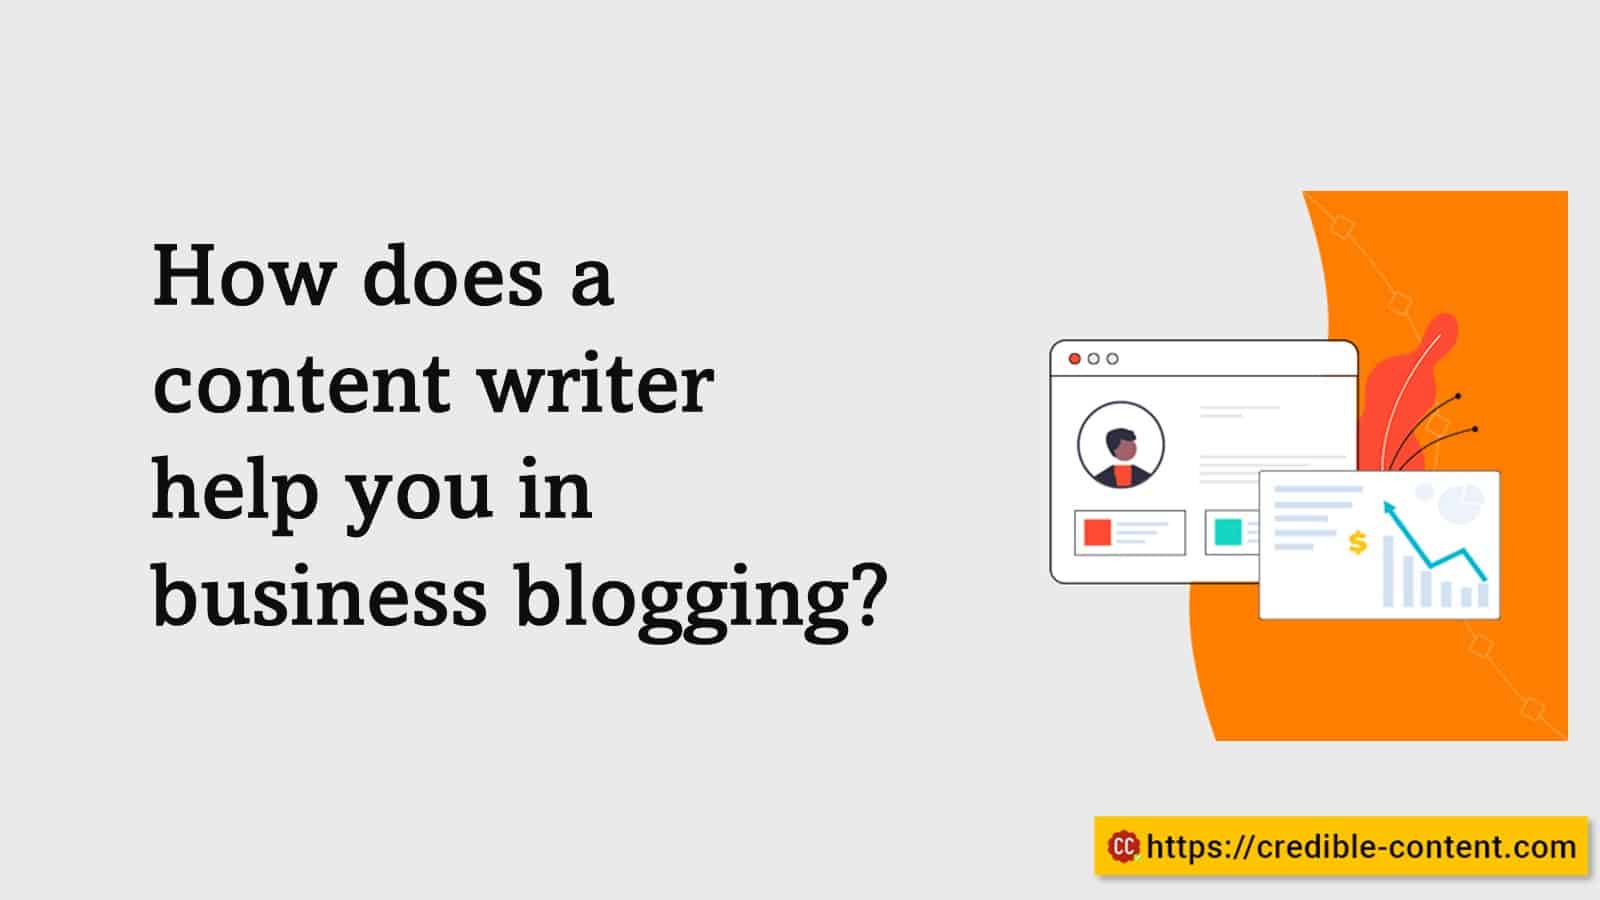 How does a content writer help you in business blogging